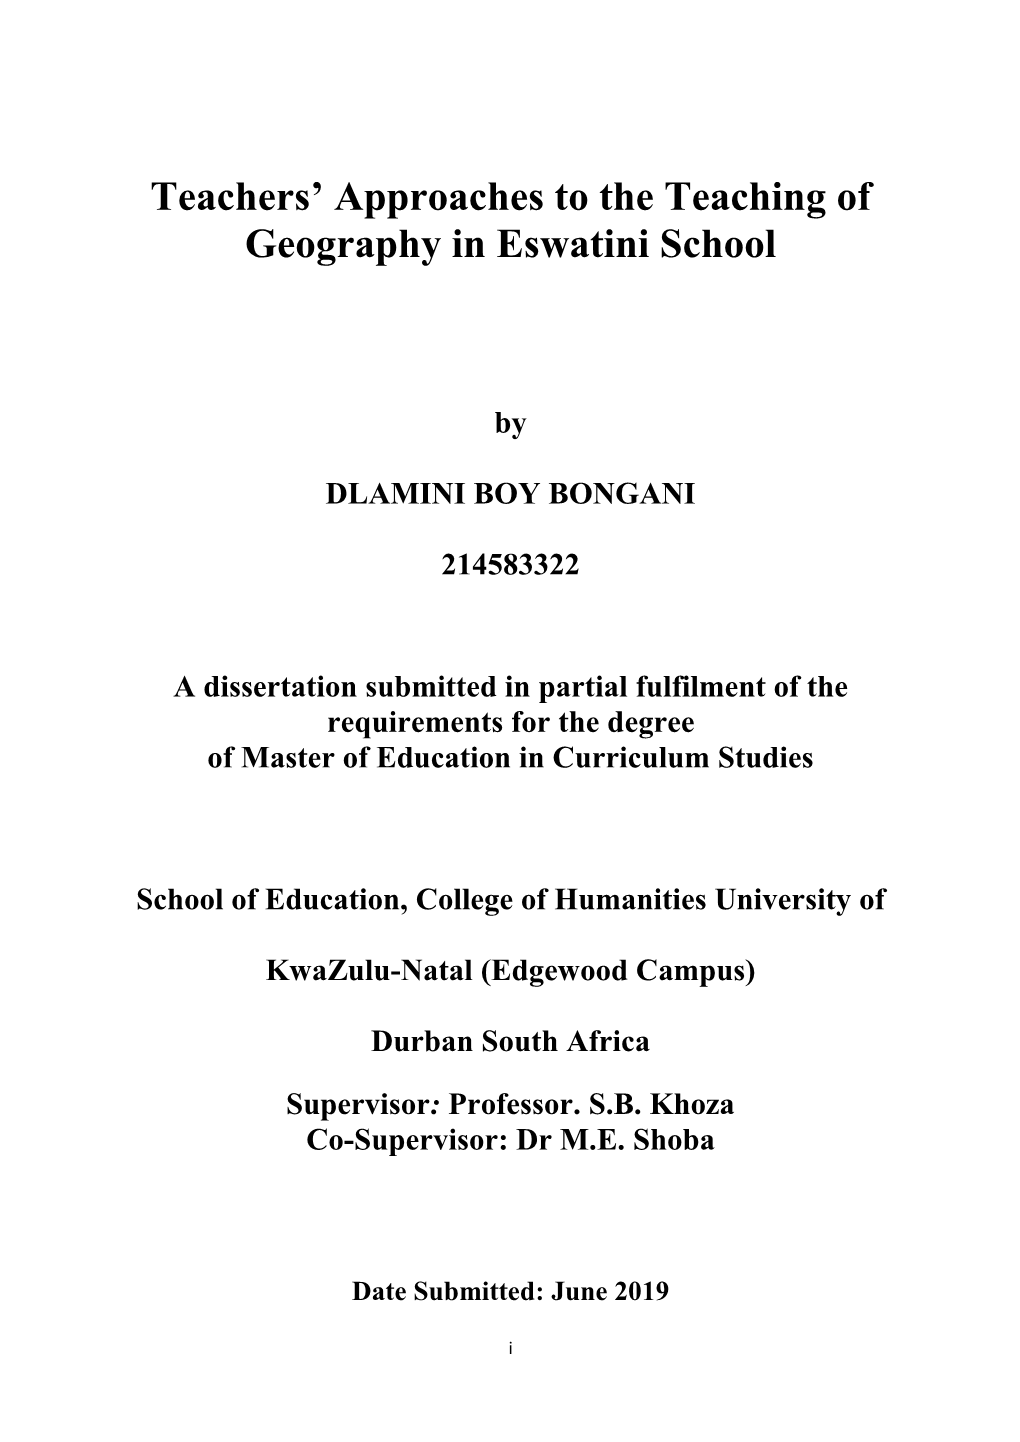 Teachers' Approaches to the Teaching of Geography in Eswatini School